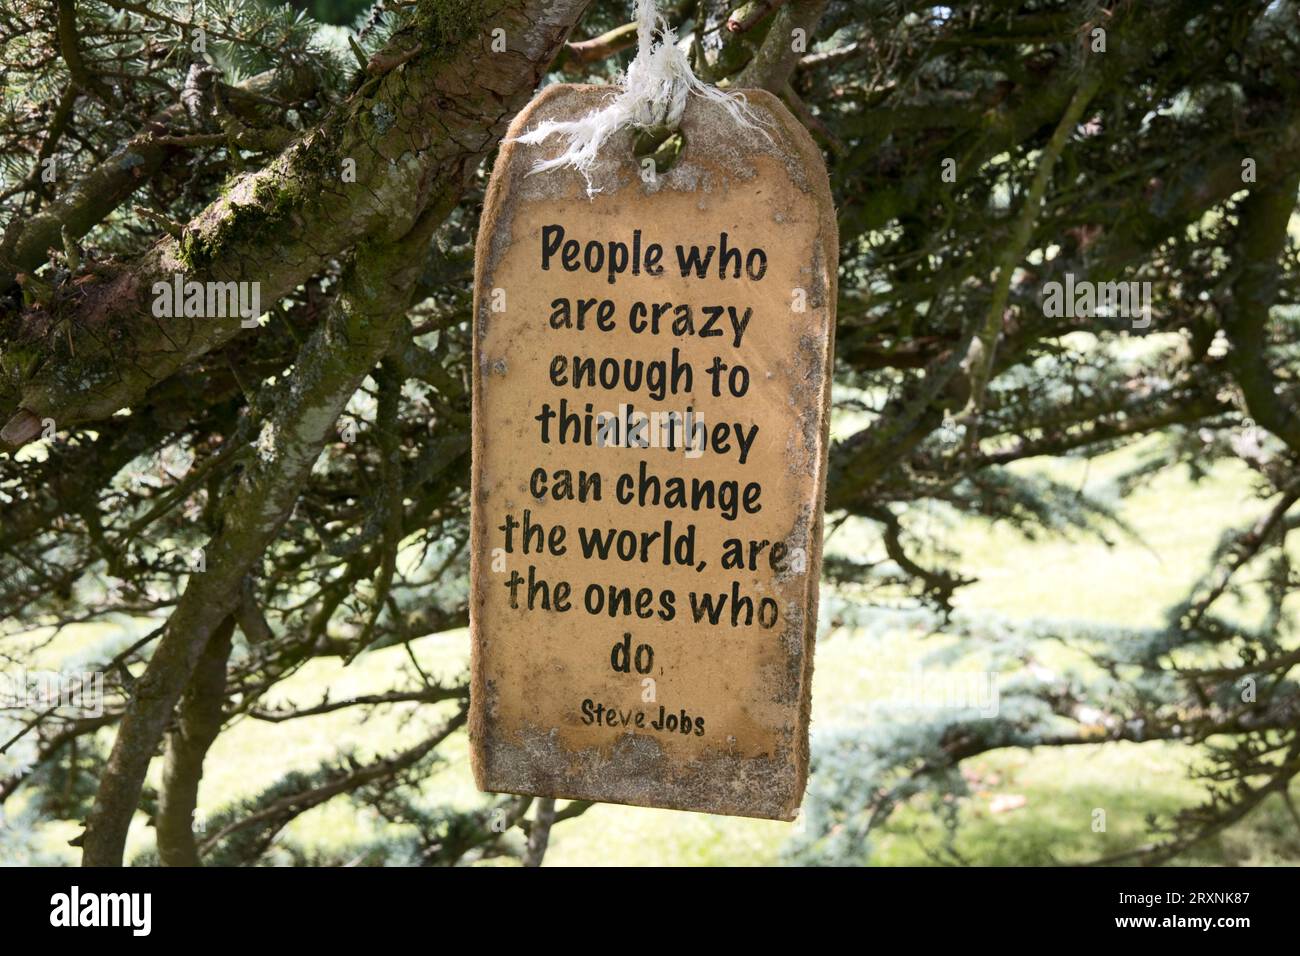 Steve Jobs quote on hanging sign at Compton Verney 18th Century manor house now an independant national art gallery set in a Capability Brown landscap Stock Photo